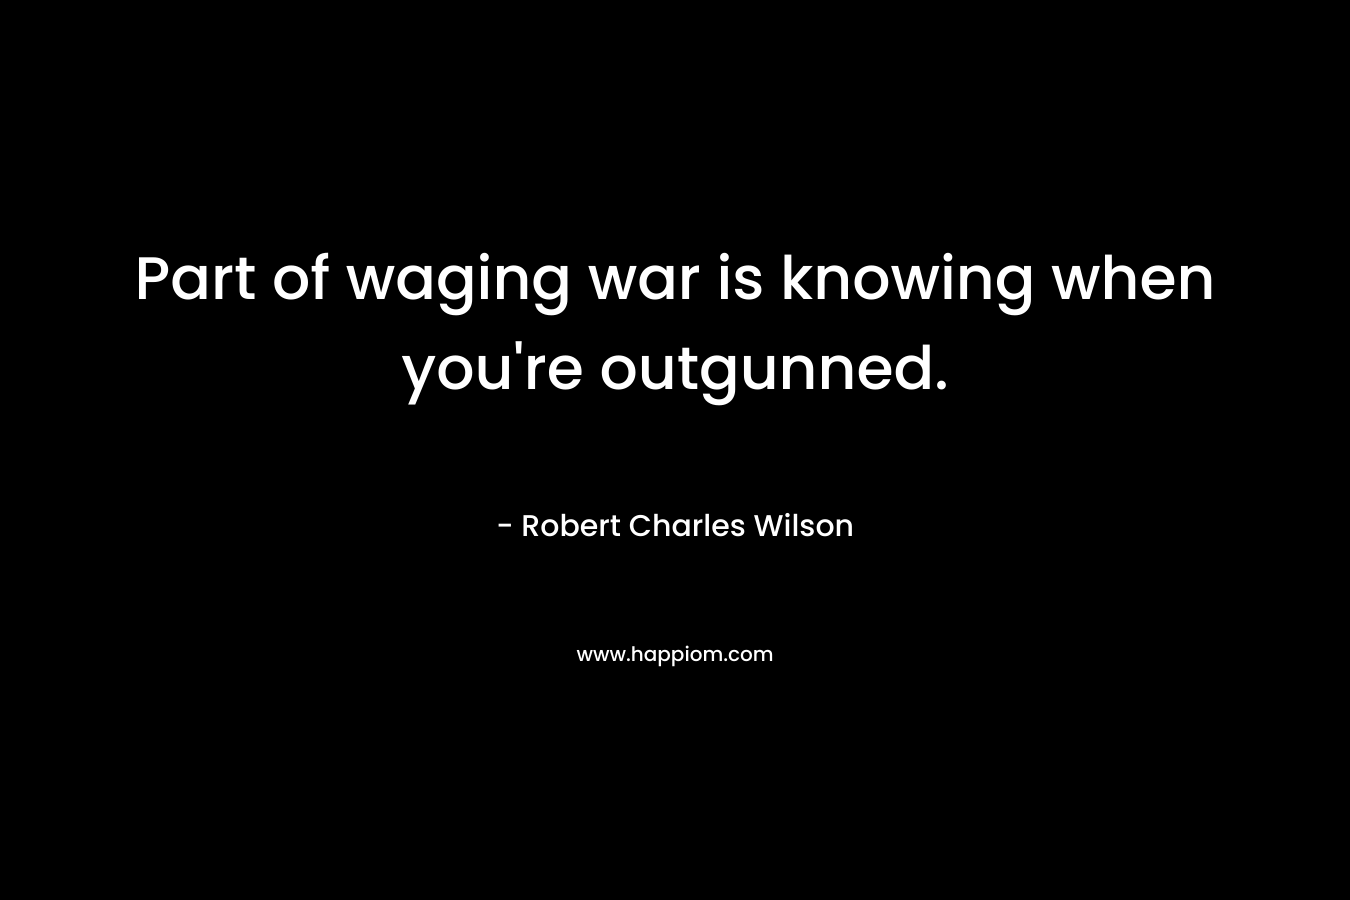 Part of waging war is knowing when you’re outgunned. – Robert Charles Wilson